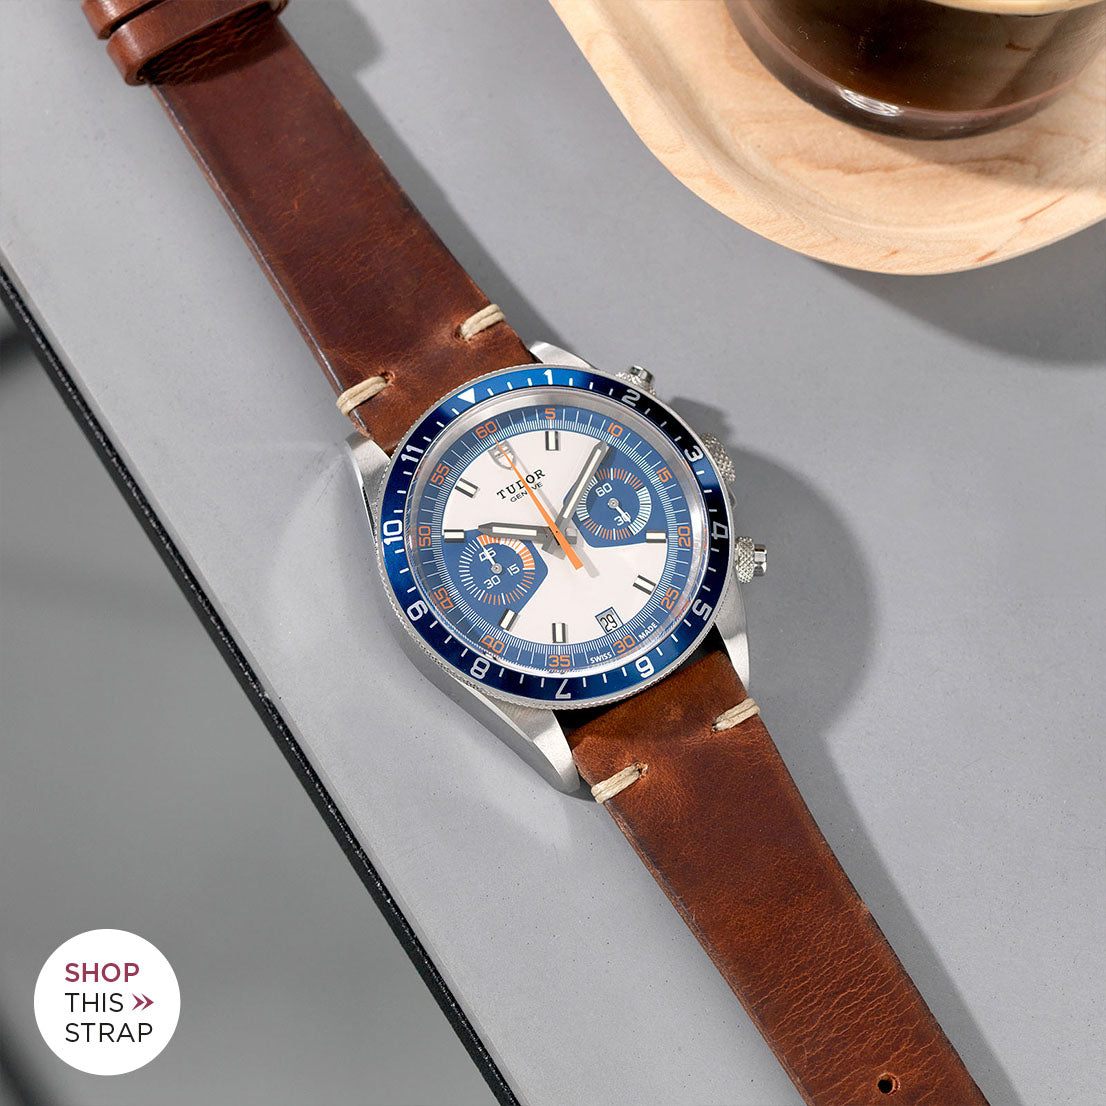 Bulang and Sons_Strap Guide _The Tudor Herritage Chronograph Blue_Siena Brown Leather Watch Strap